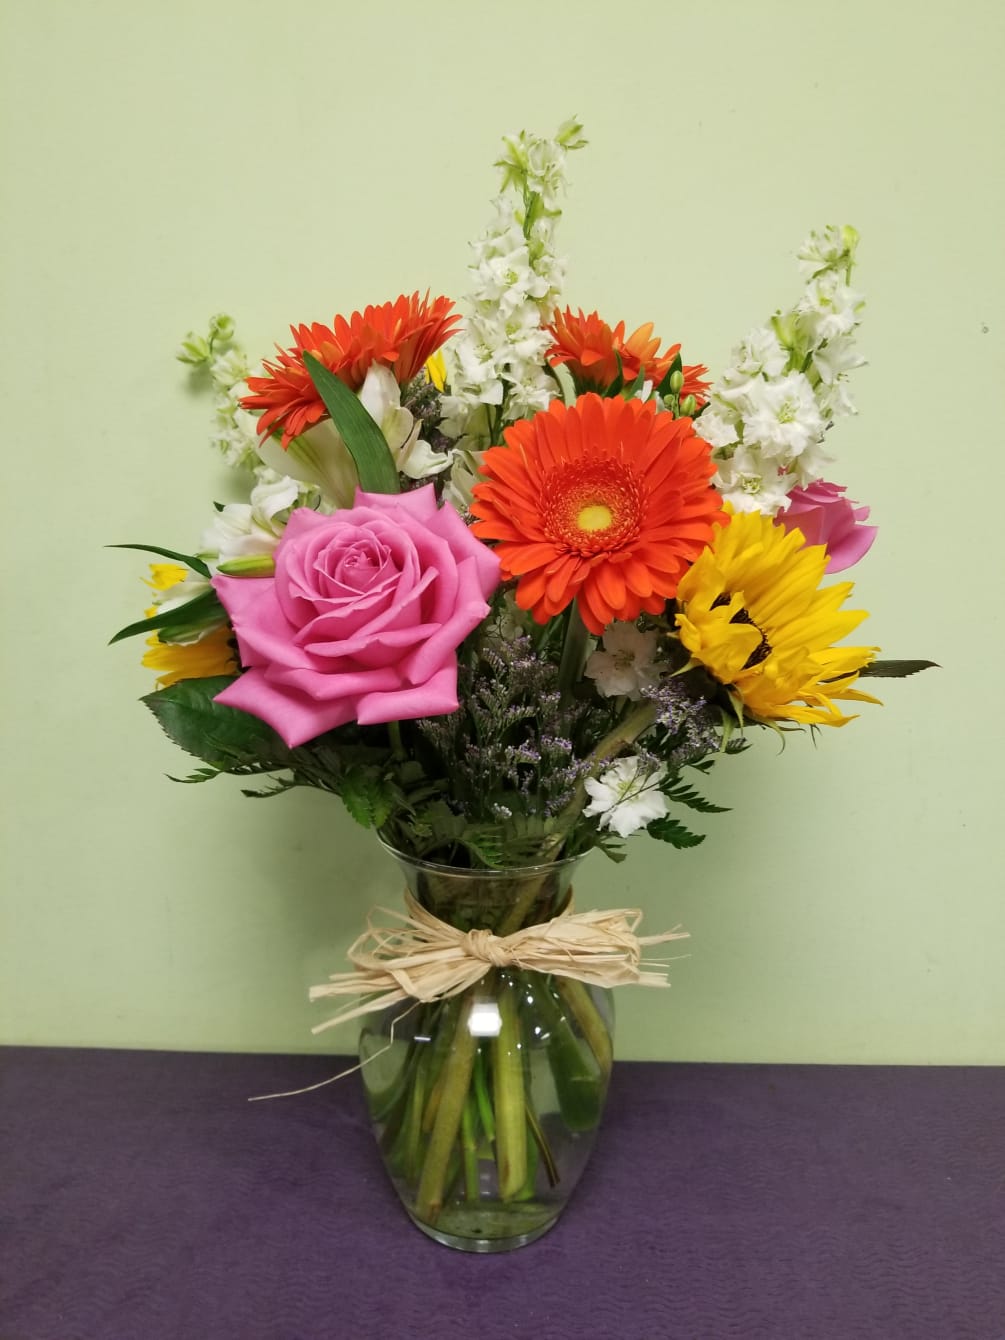 Send something sweet with this adorable arrangement! It is filled with fresh